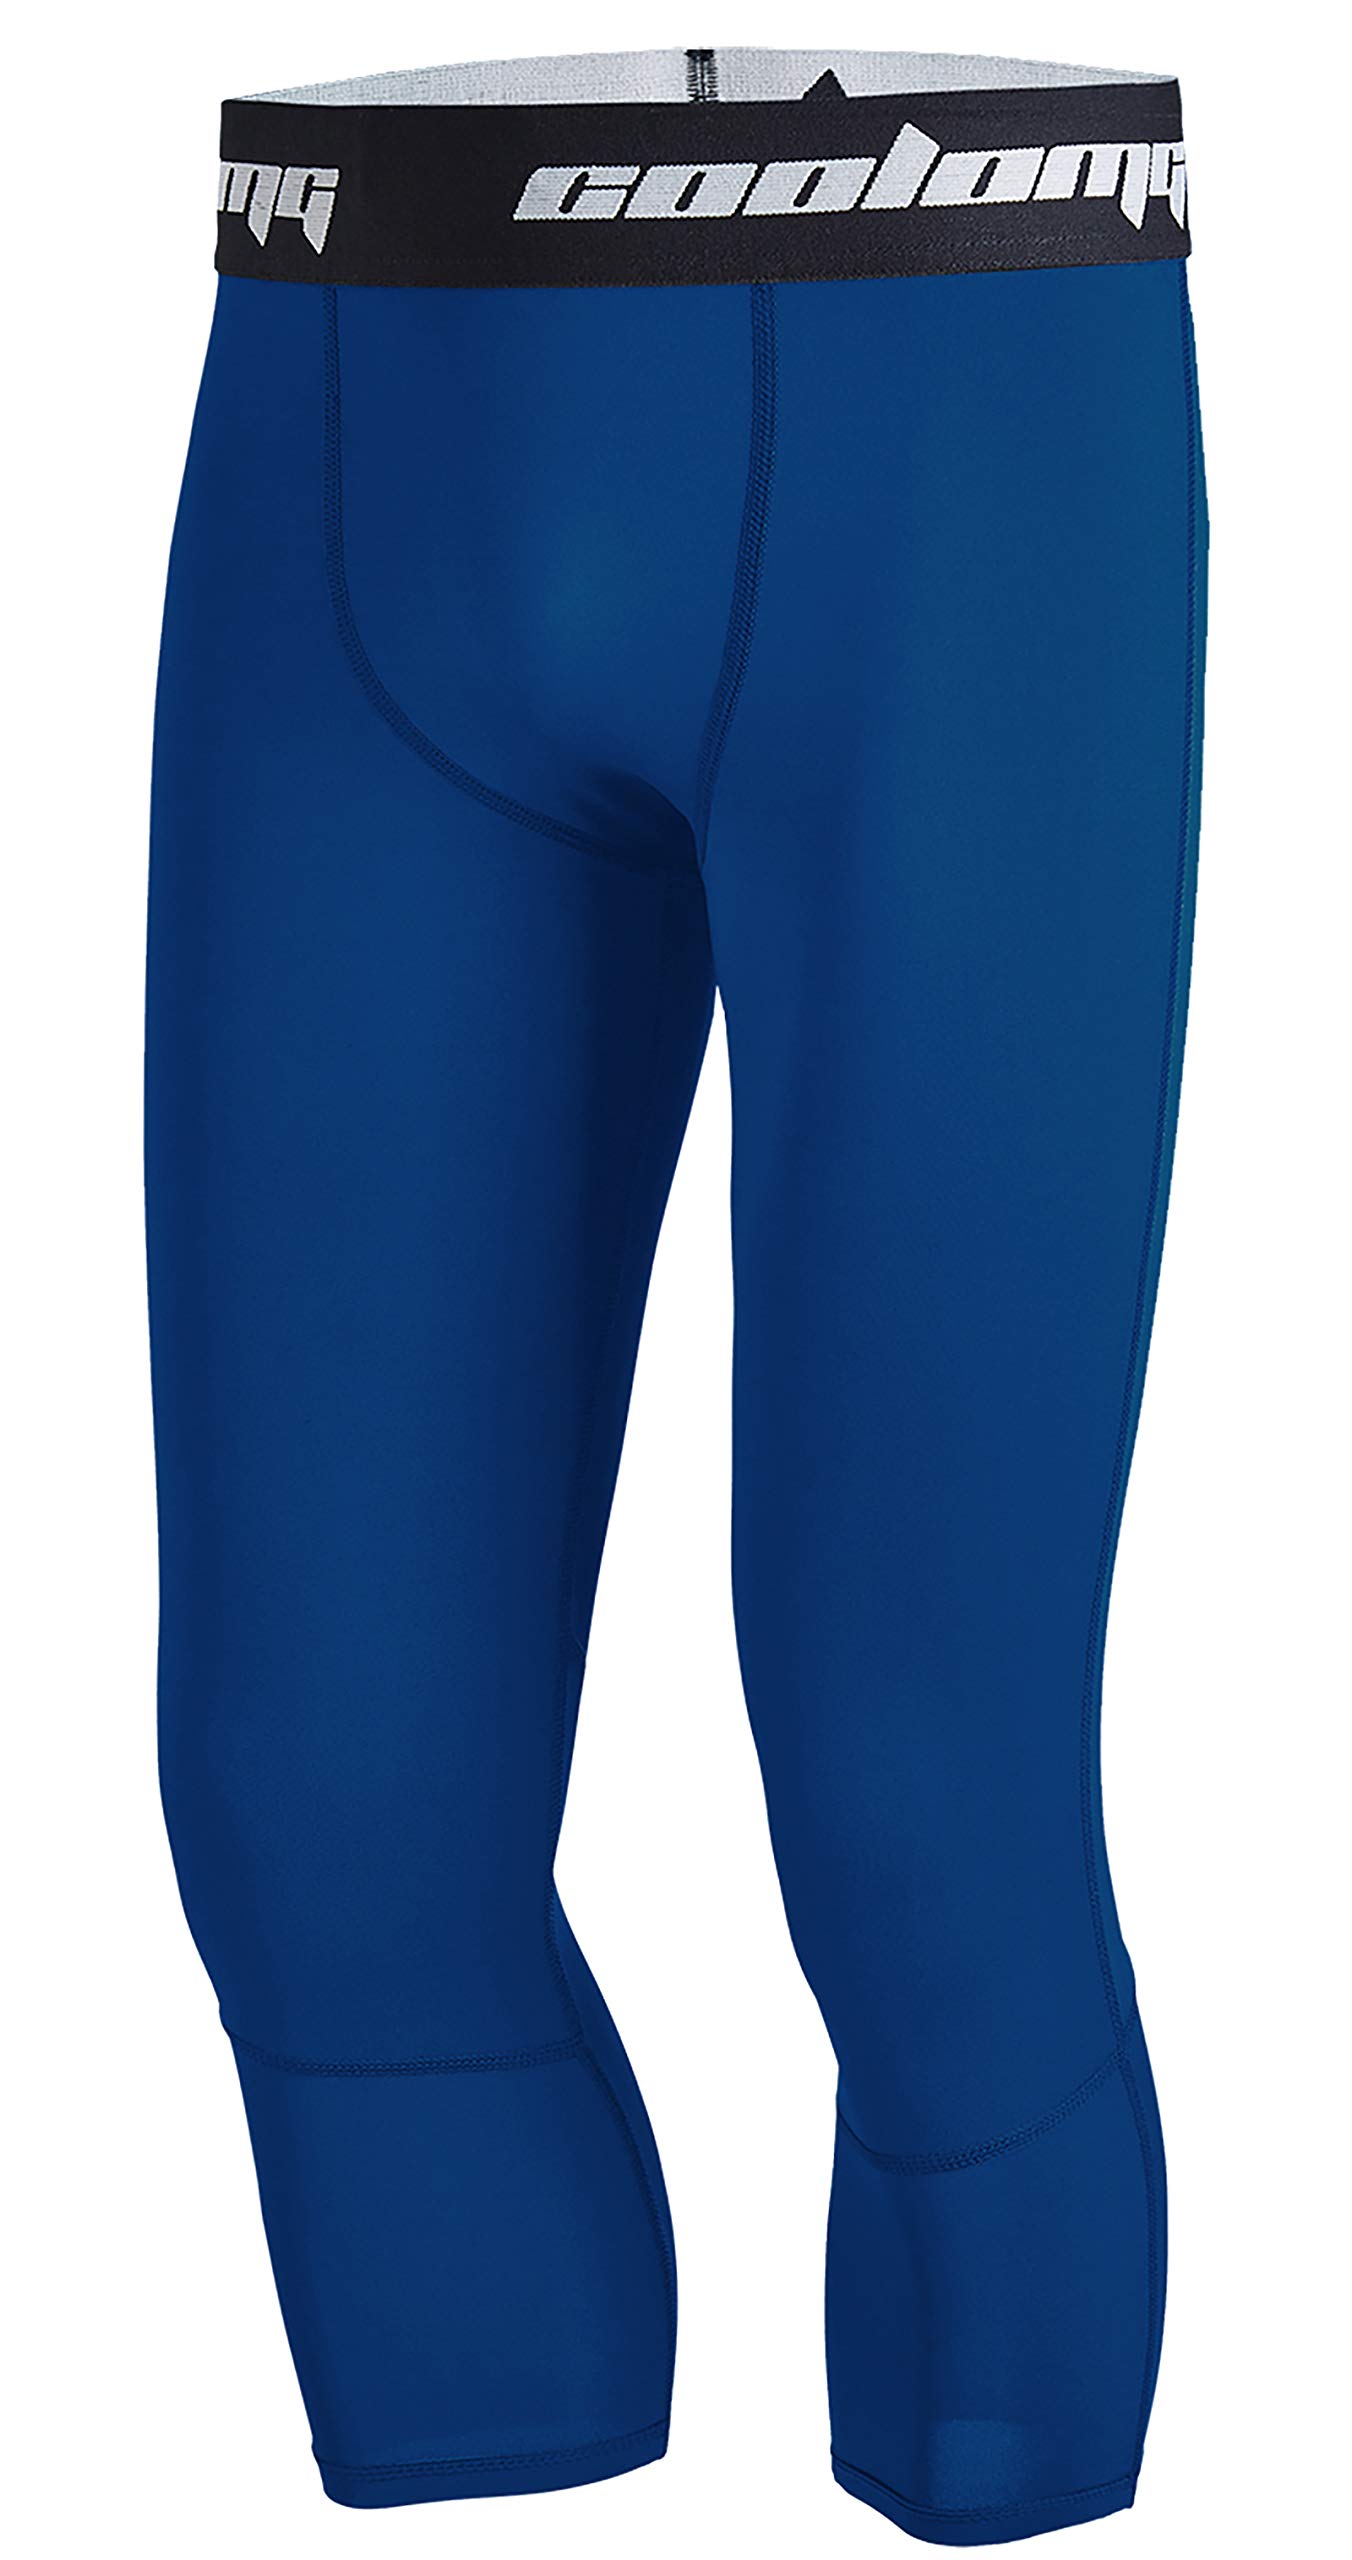 COOLOMG Men Compression Pants Youth Basketball Tights Running